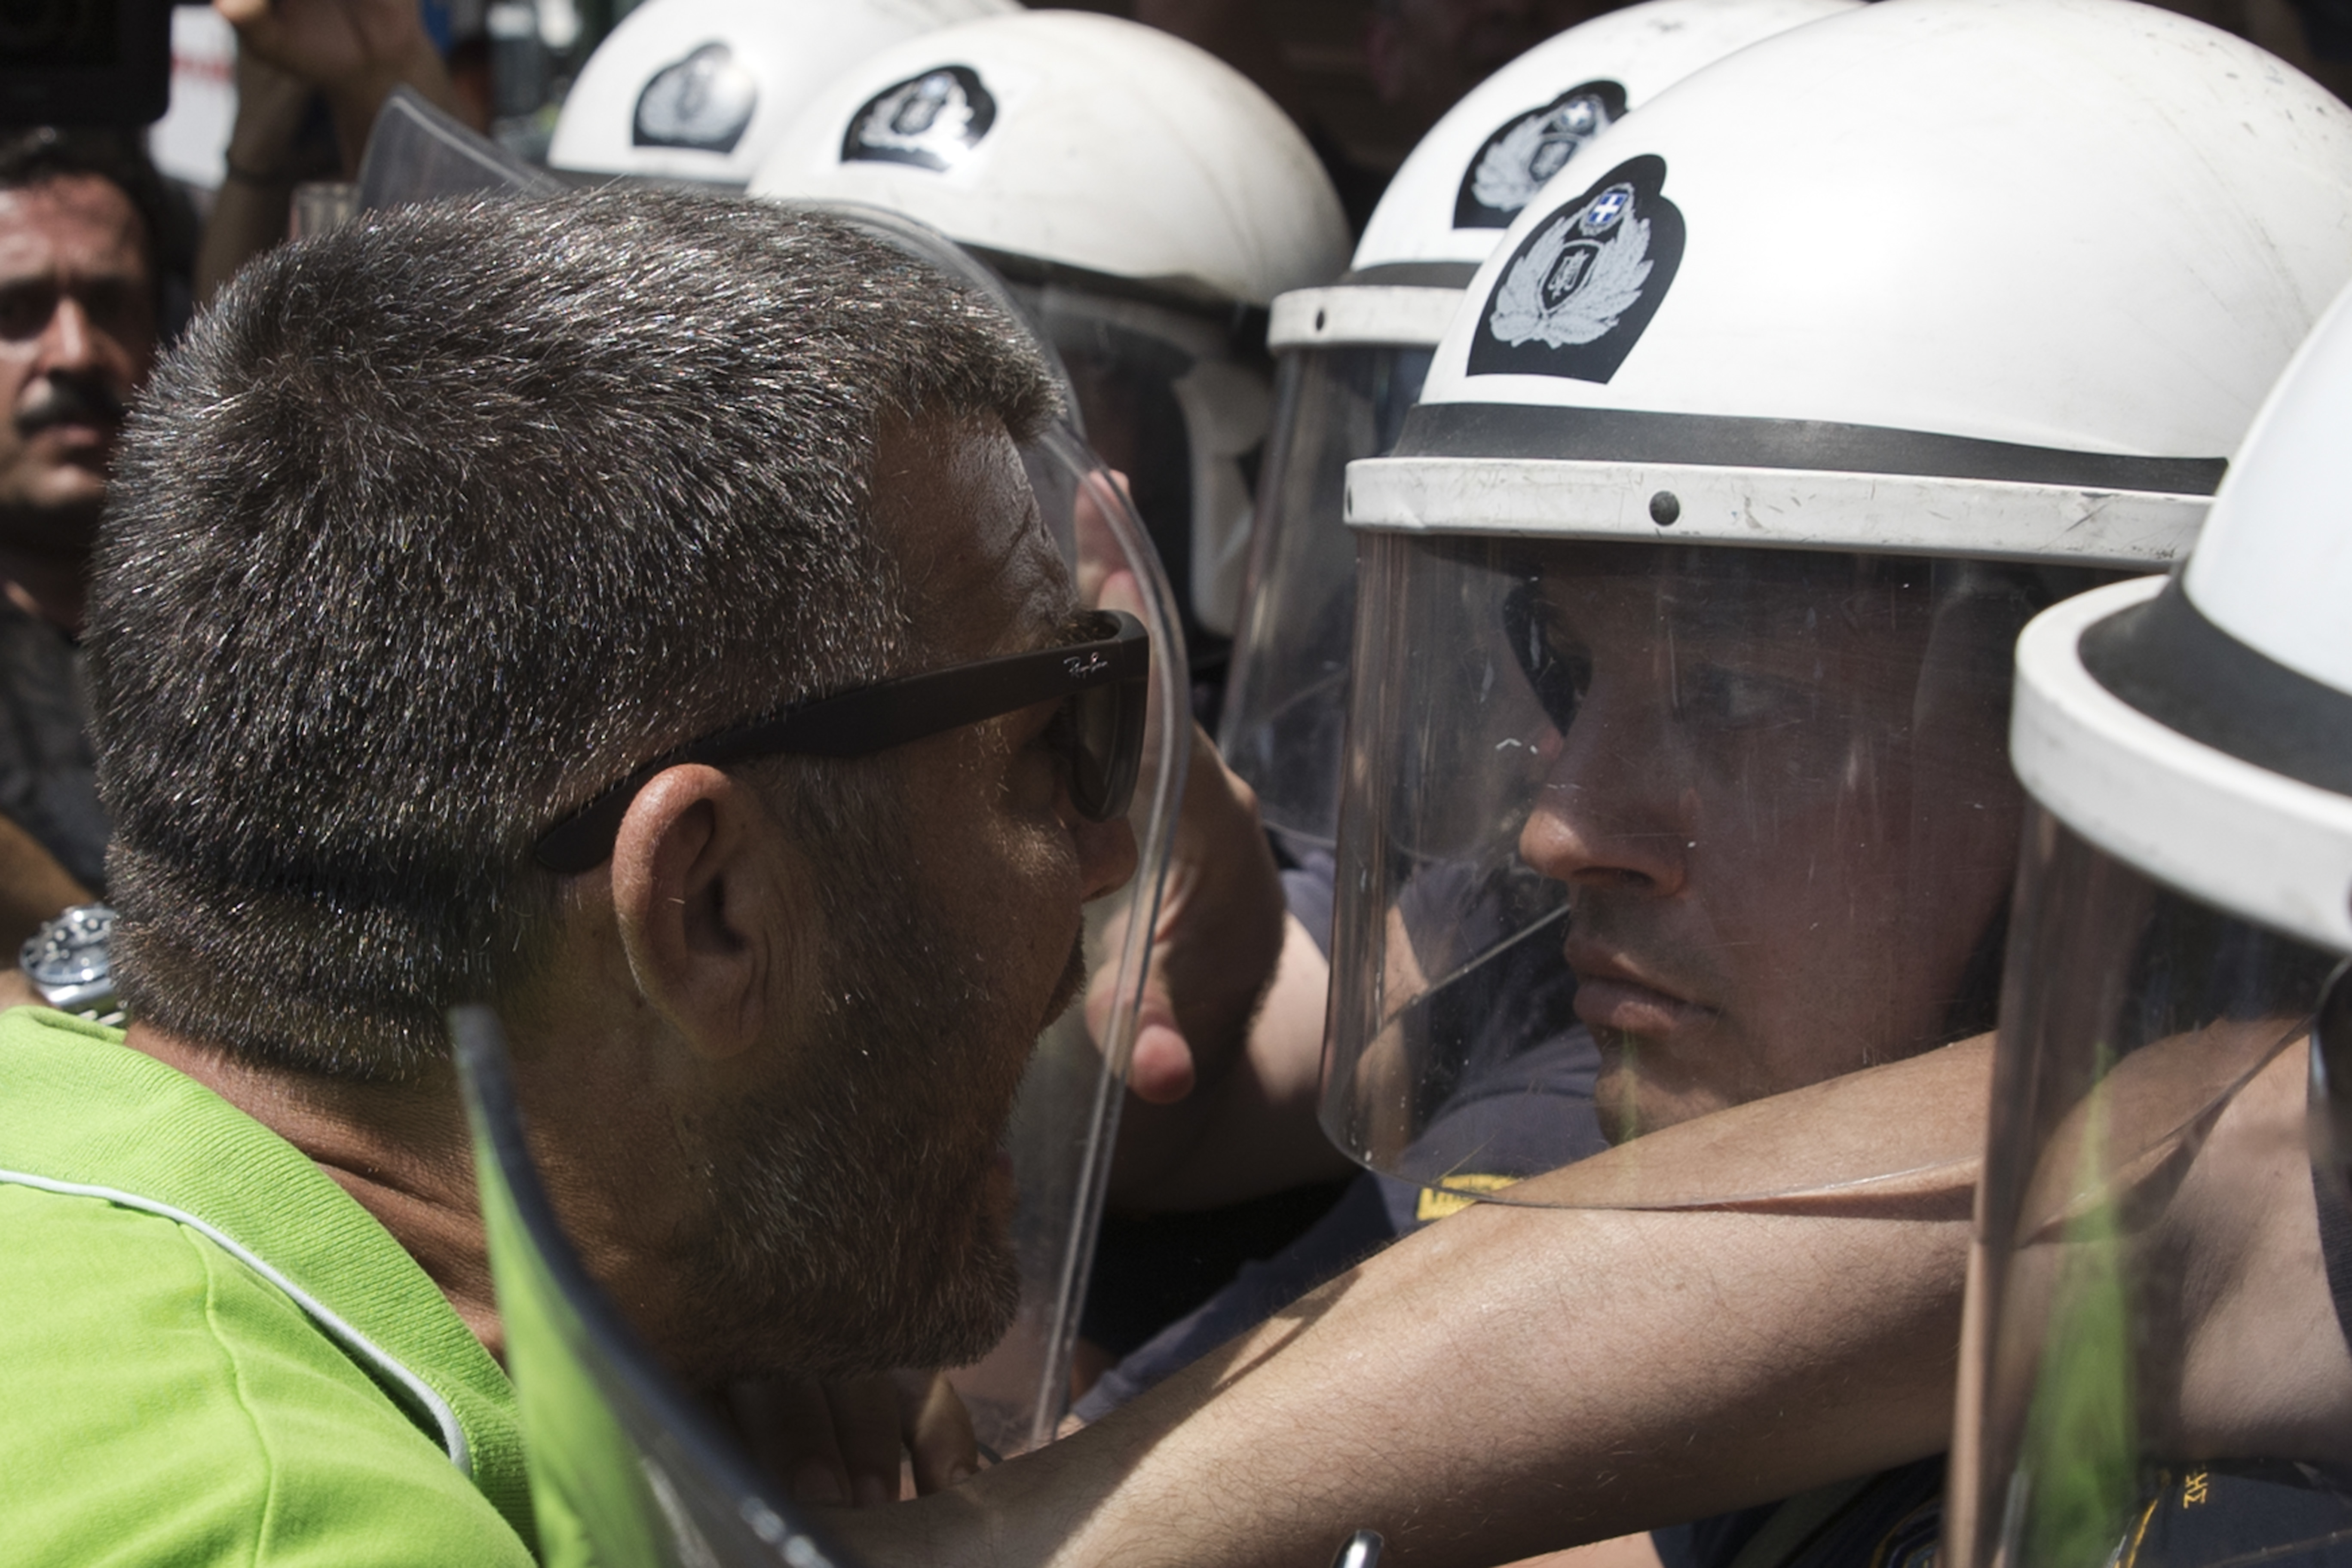 A striking municipal worker argues with a riot police officer guarding the entrance of the Interior Ministry during a protest, in Athens, on Monday June 26, 2017. With a heat wave expected later this week, Greece's government Monday urging striking garbage collectors to return to work after a 10-day protest has left huge piles of trash around Athens. (AP Photo/Petros Giannakouris)